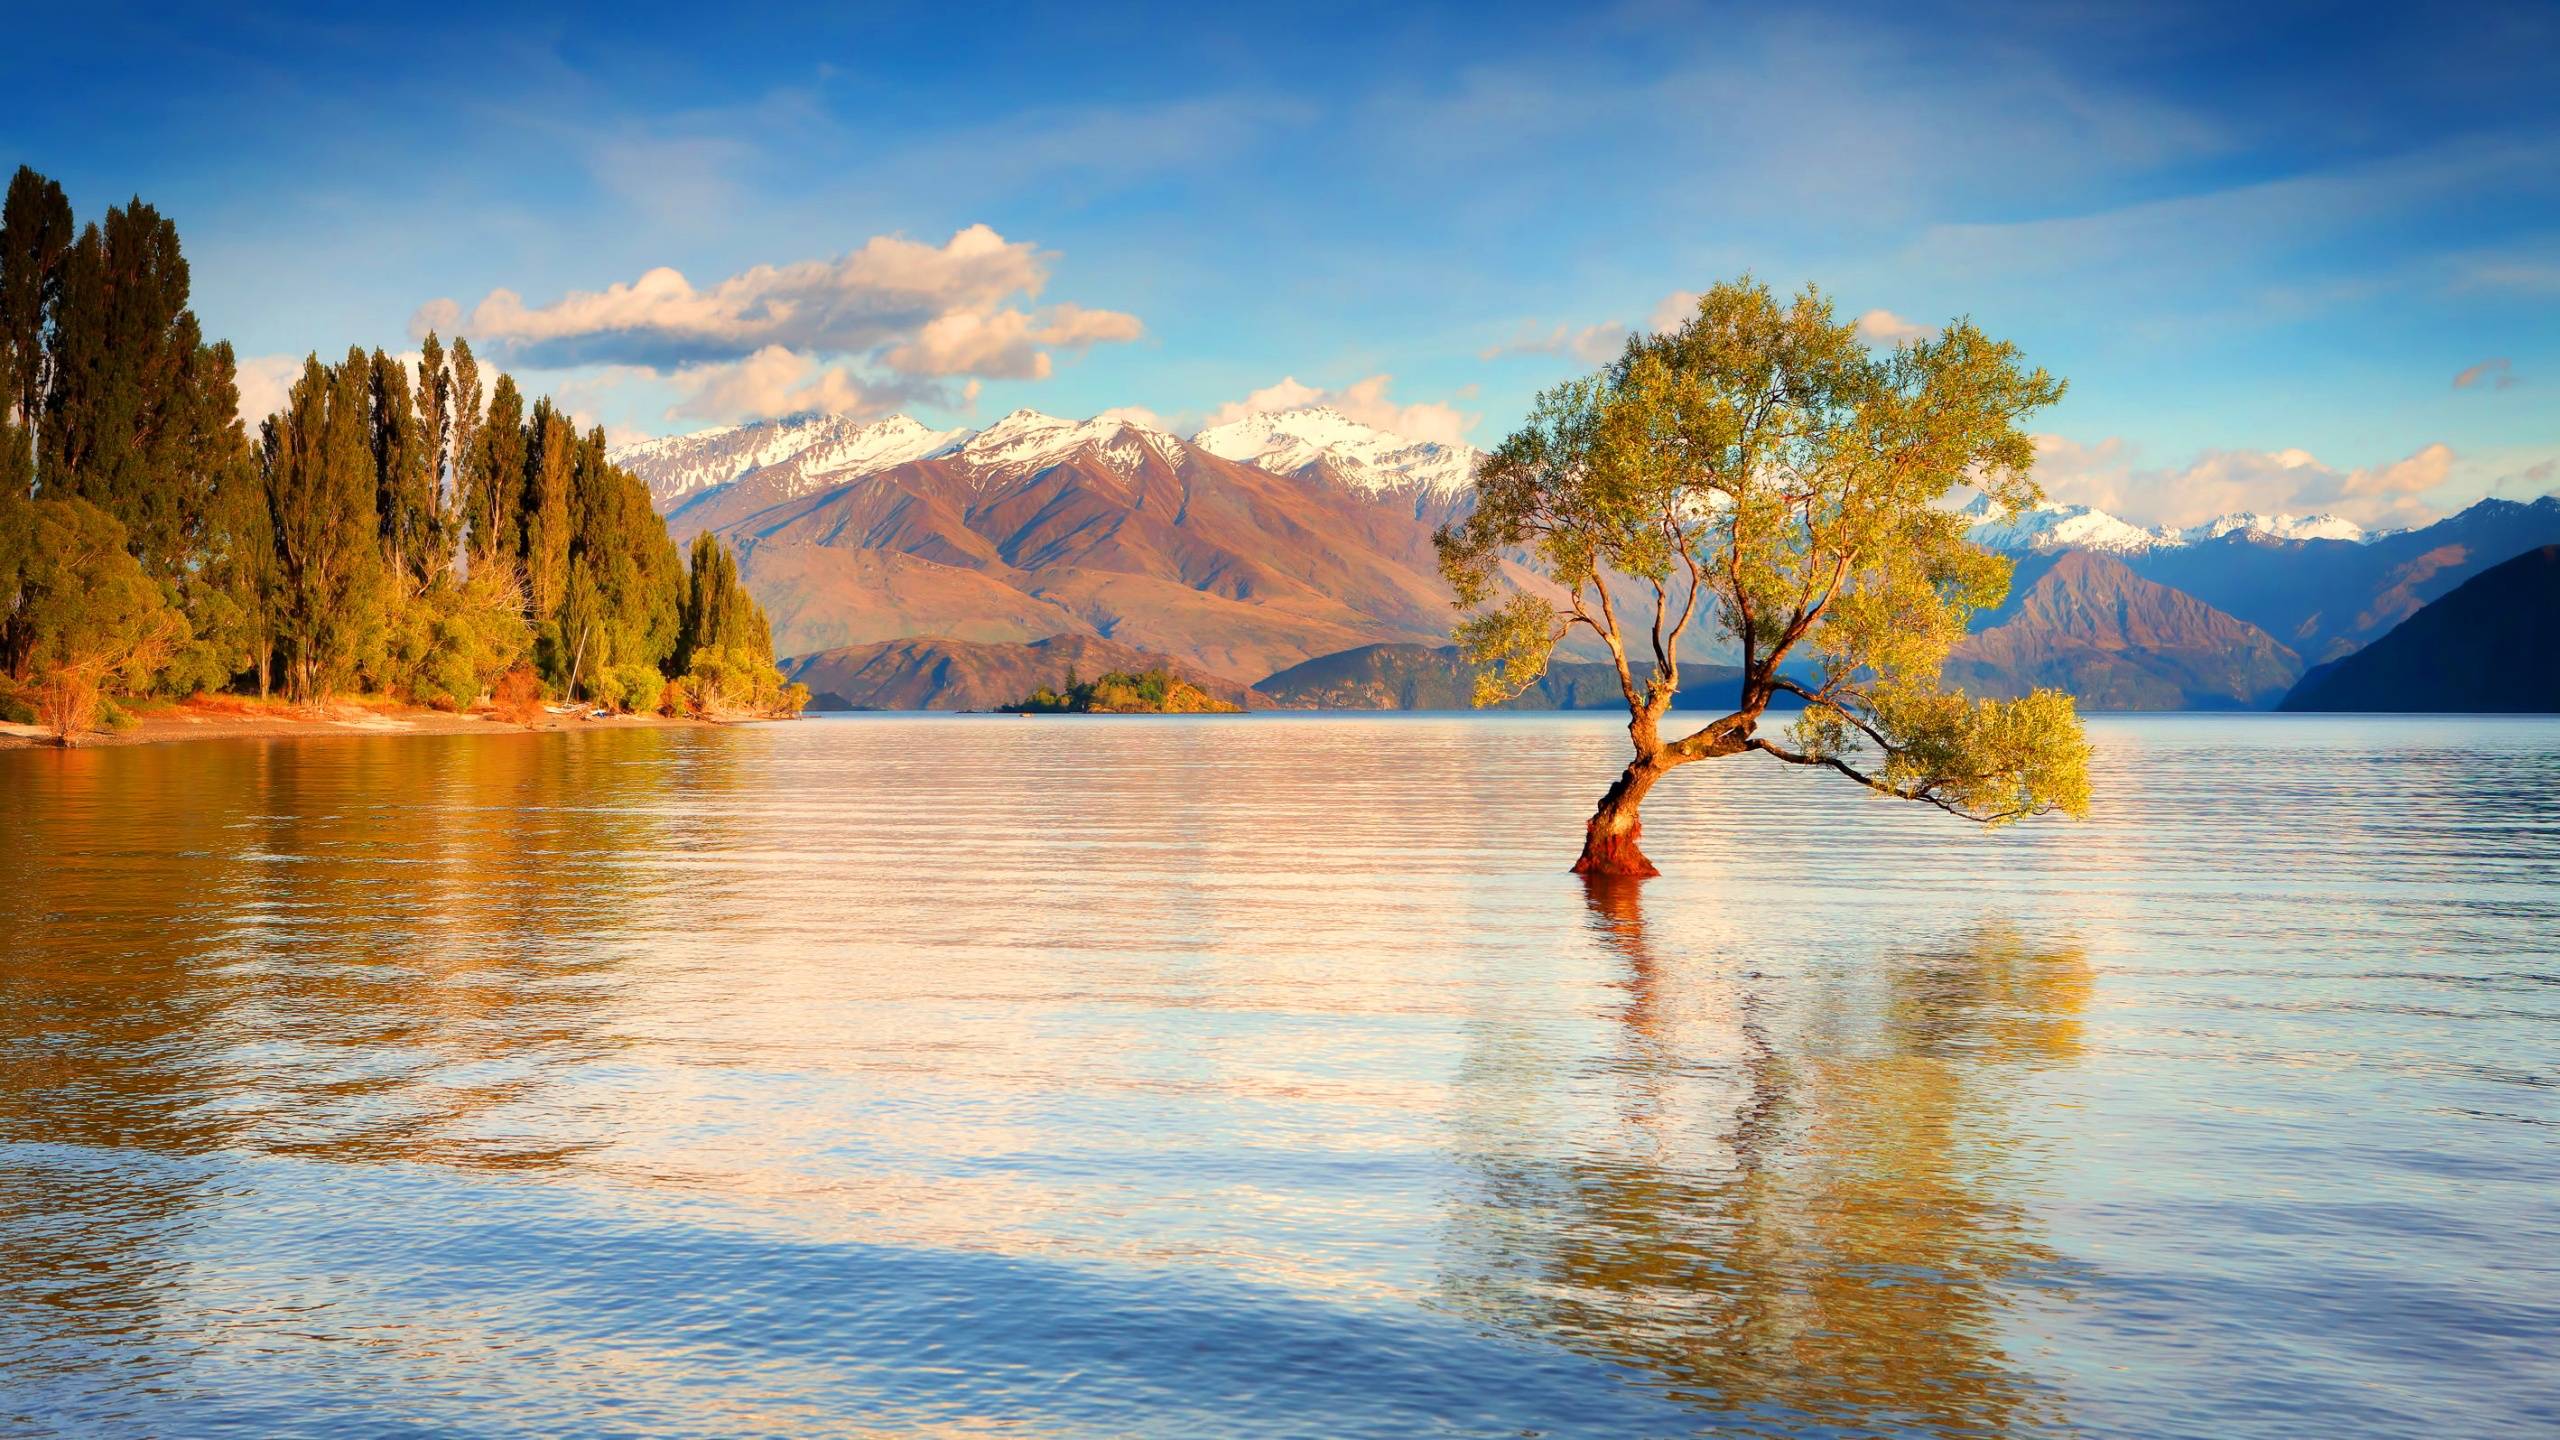 40 Full HD New Zealand Wallpapers For Free Download: The Land of the